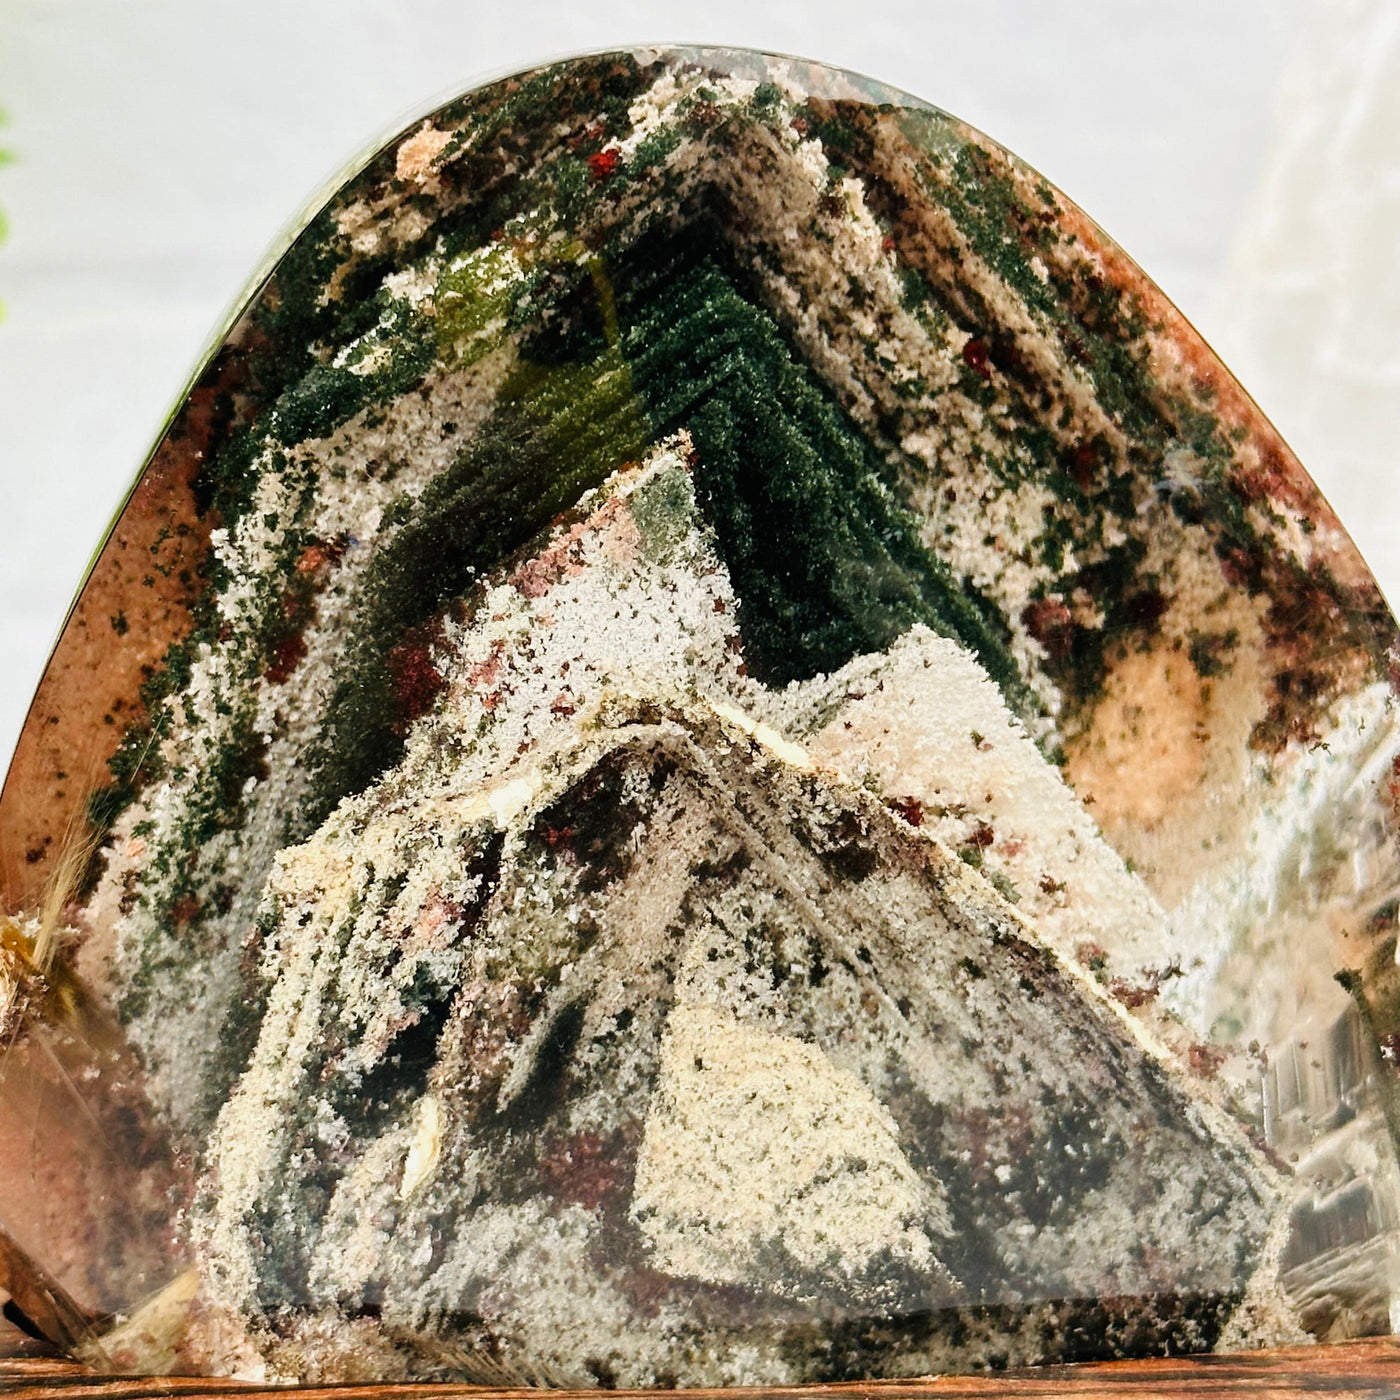 close up of the lodolite formation within the quartz